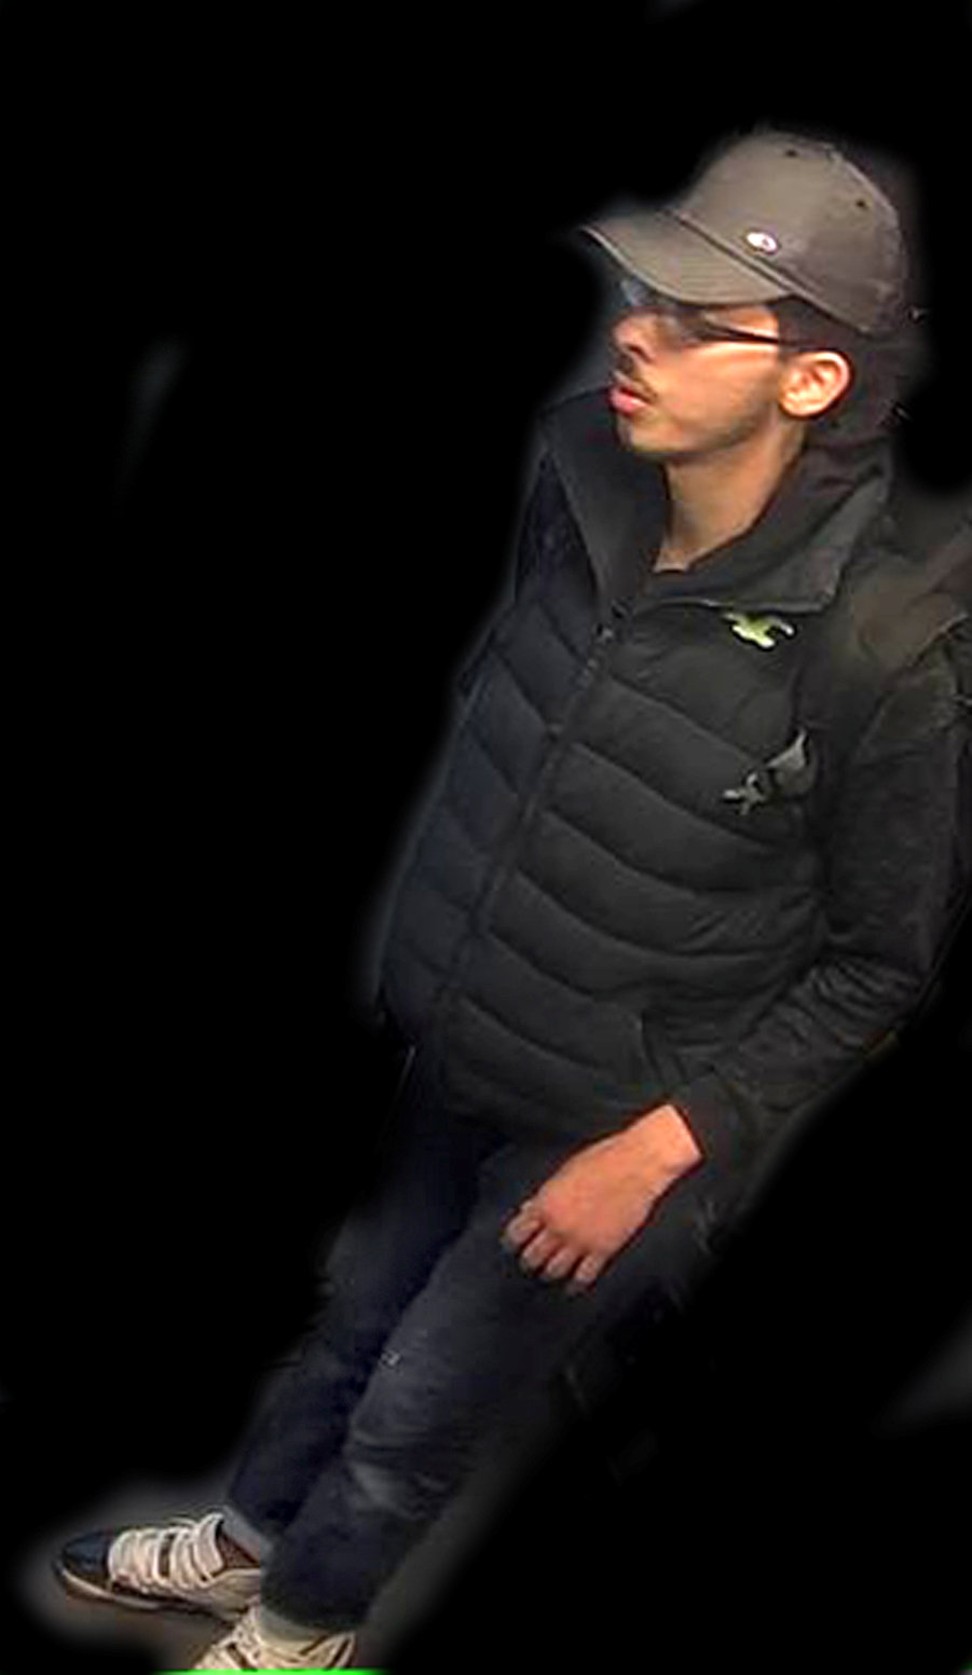 Salman Abedi, the bomber behind the Manchester suicide bombing, in an image taken from closed-circuit TV on the night of the attack. Photo: Reuters